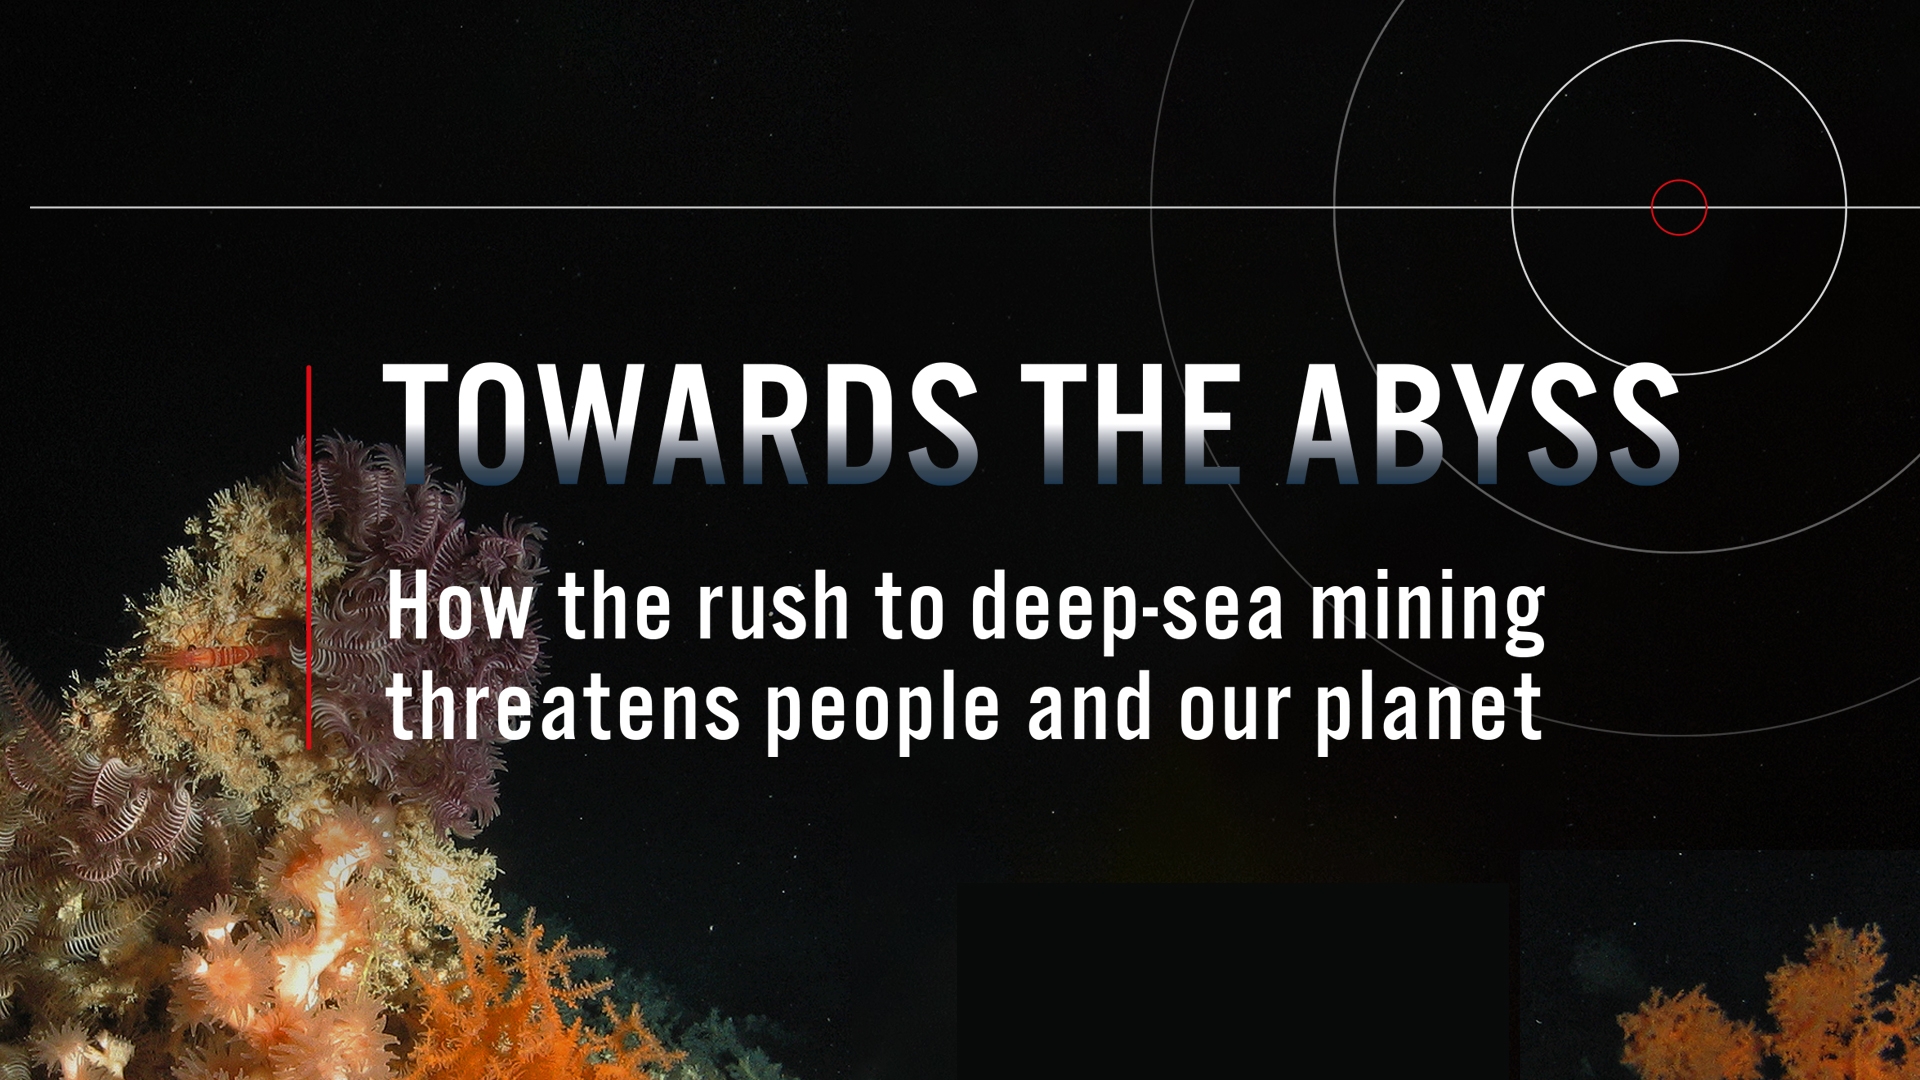 Towards the abyss: How the rush to deep-sea mining threatens people and our planet